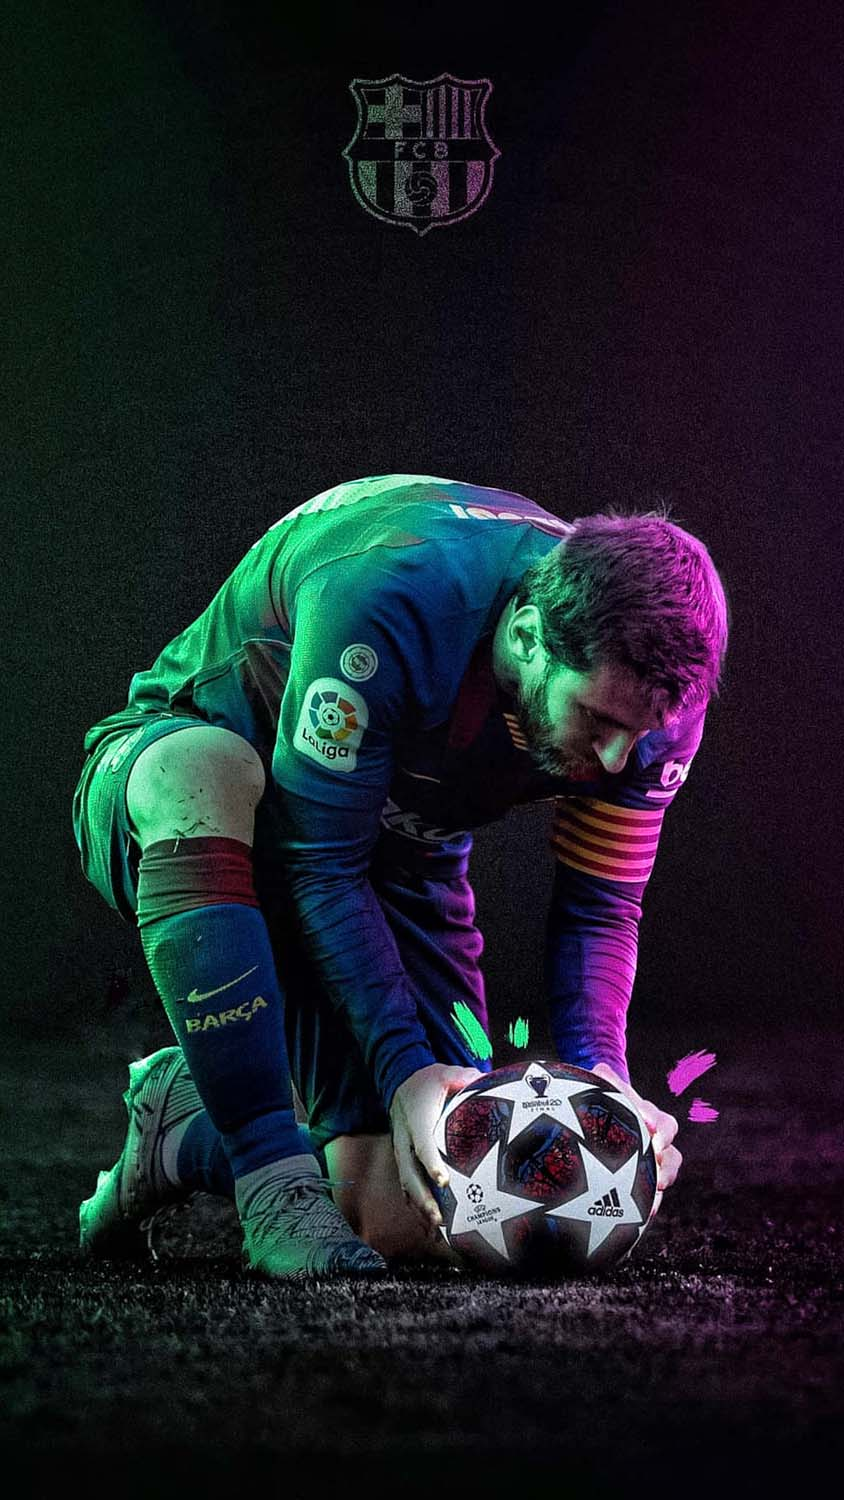 Messi Ready to Goal iPhone Wallpaper 4K  iPhone Wallpapers